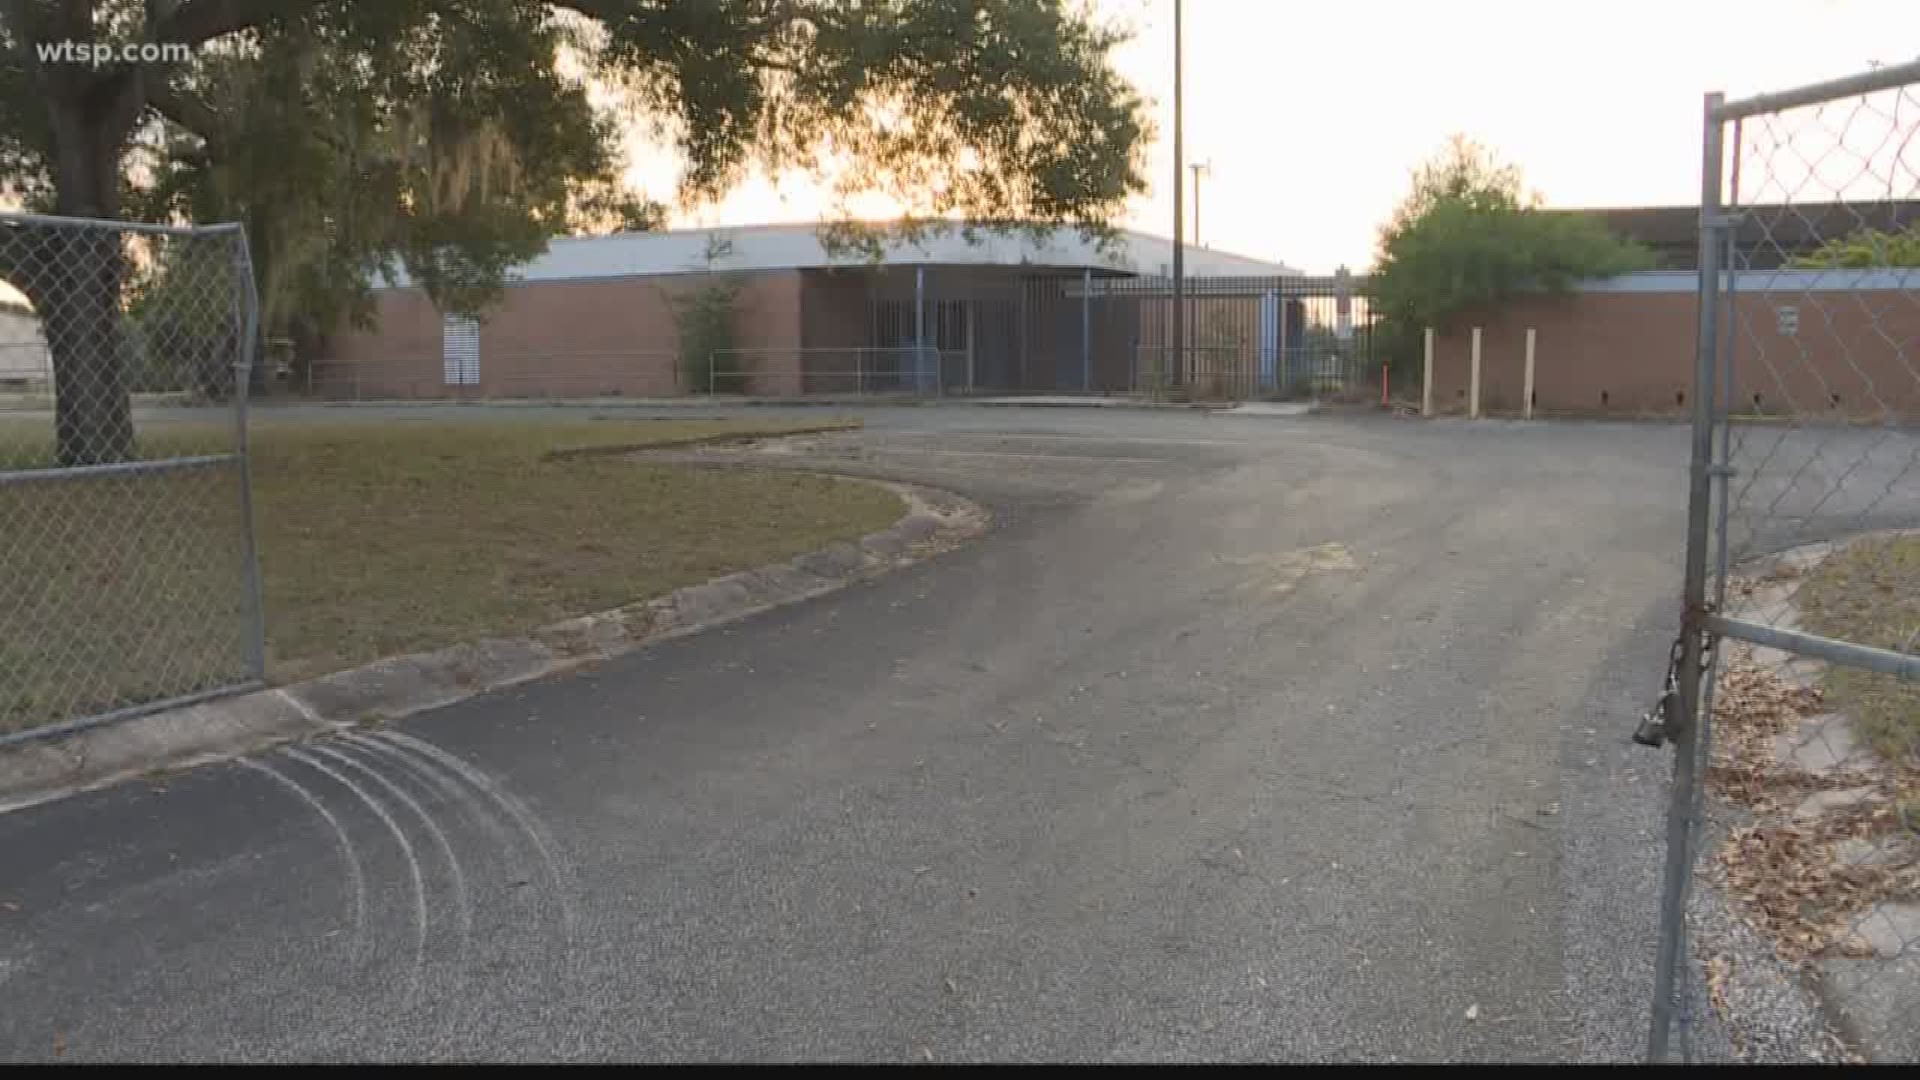 The Clearwater NAACP confirms it is investigating the possibility of a second lost black cemetery in the area, this time on the property of a Pinellas County school.